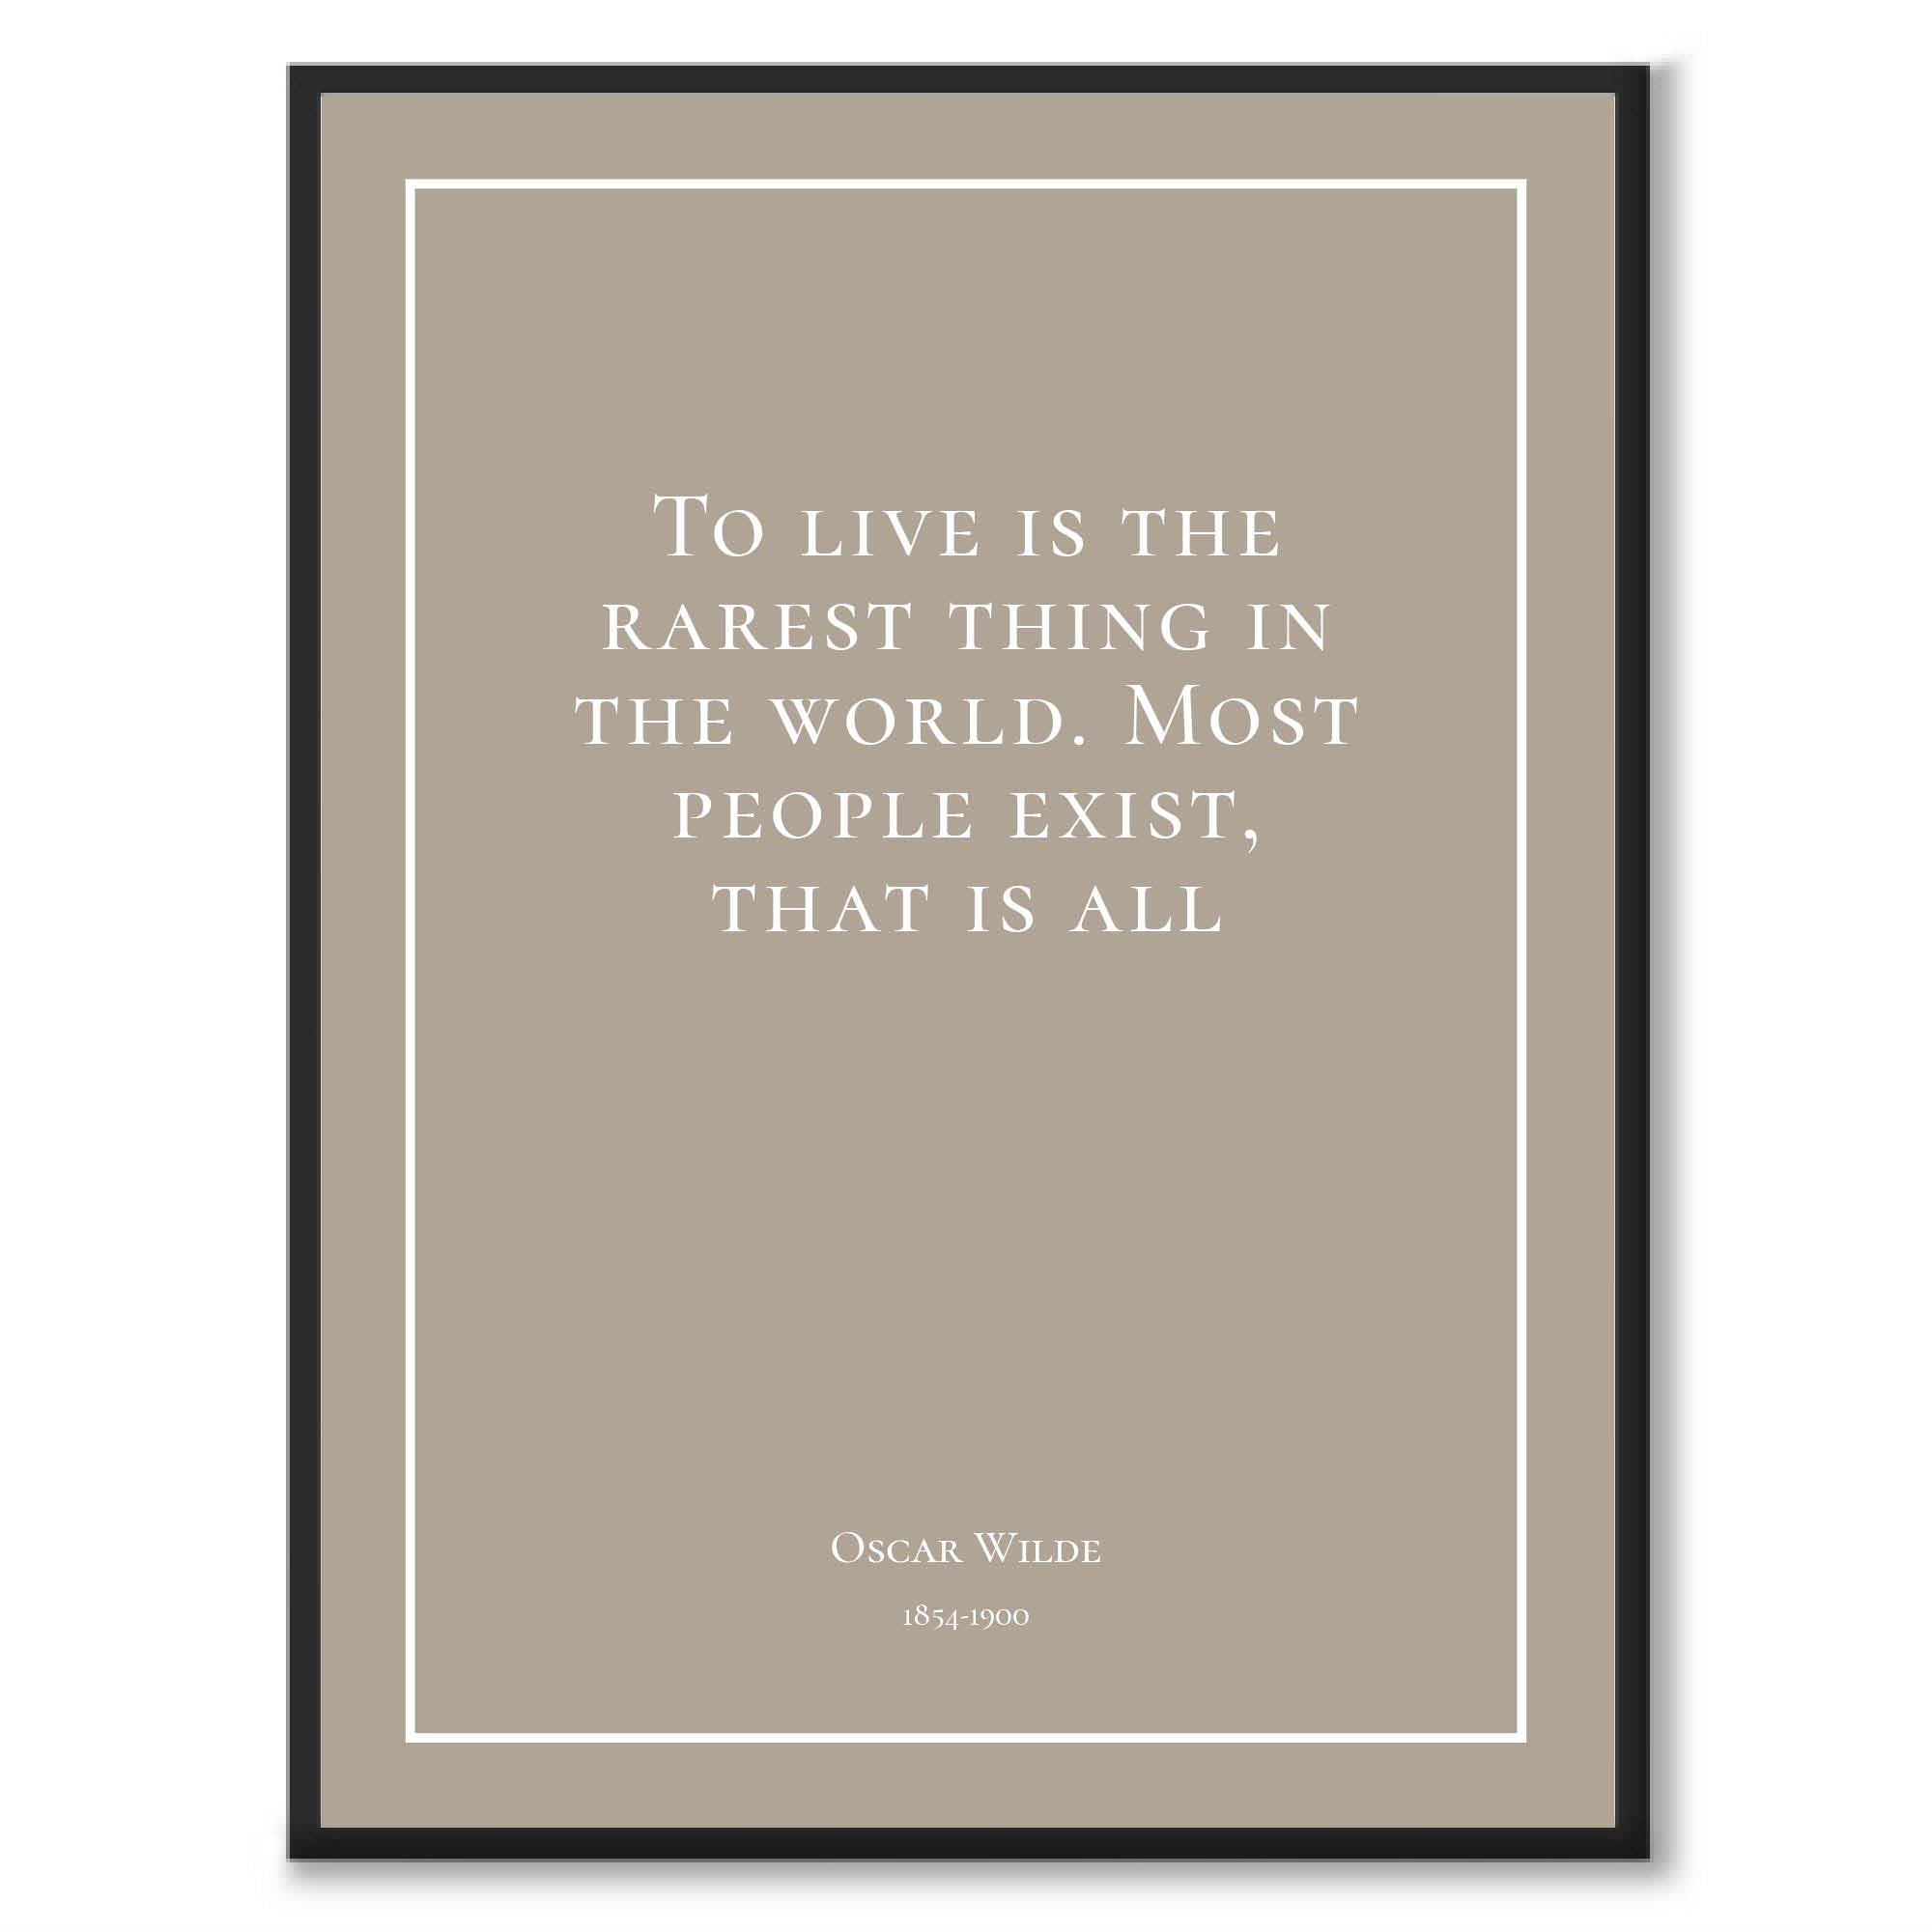 Wilde - To live is the rarest thing in the world. Most people exist, that is all - Historly AB